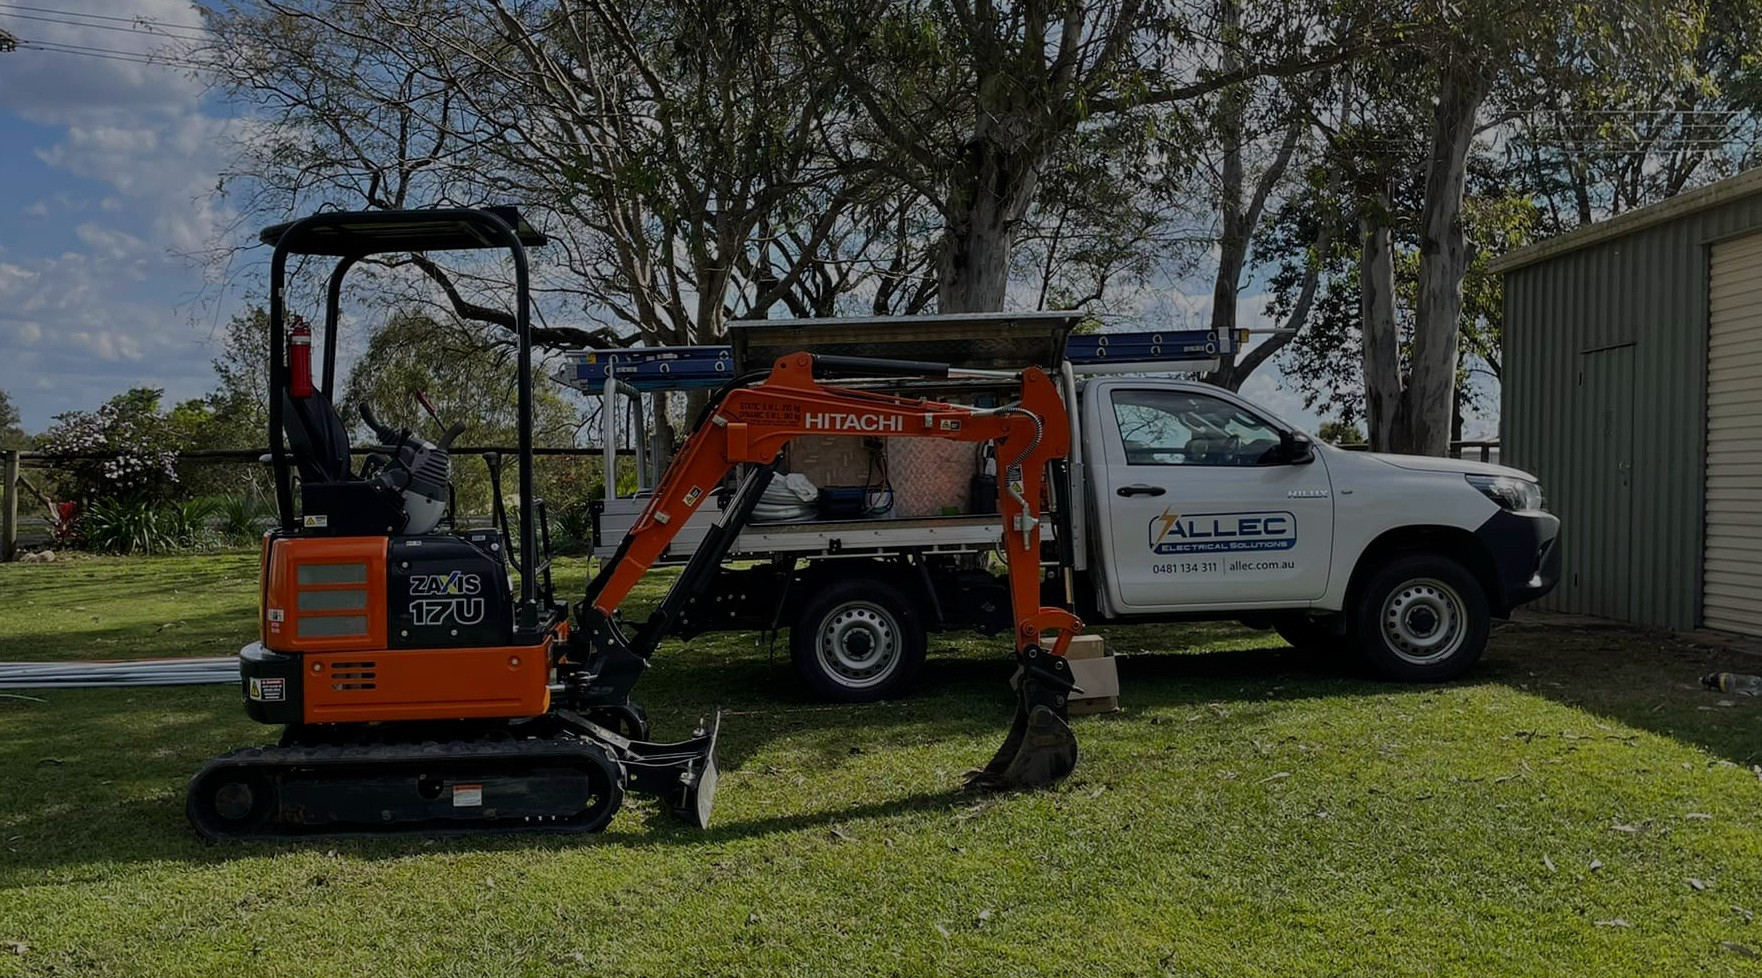 Allec Electrical Solutions branded car and excavator standing on a green grass.